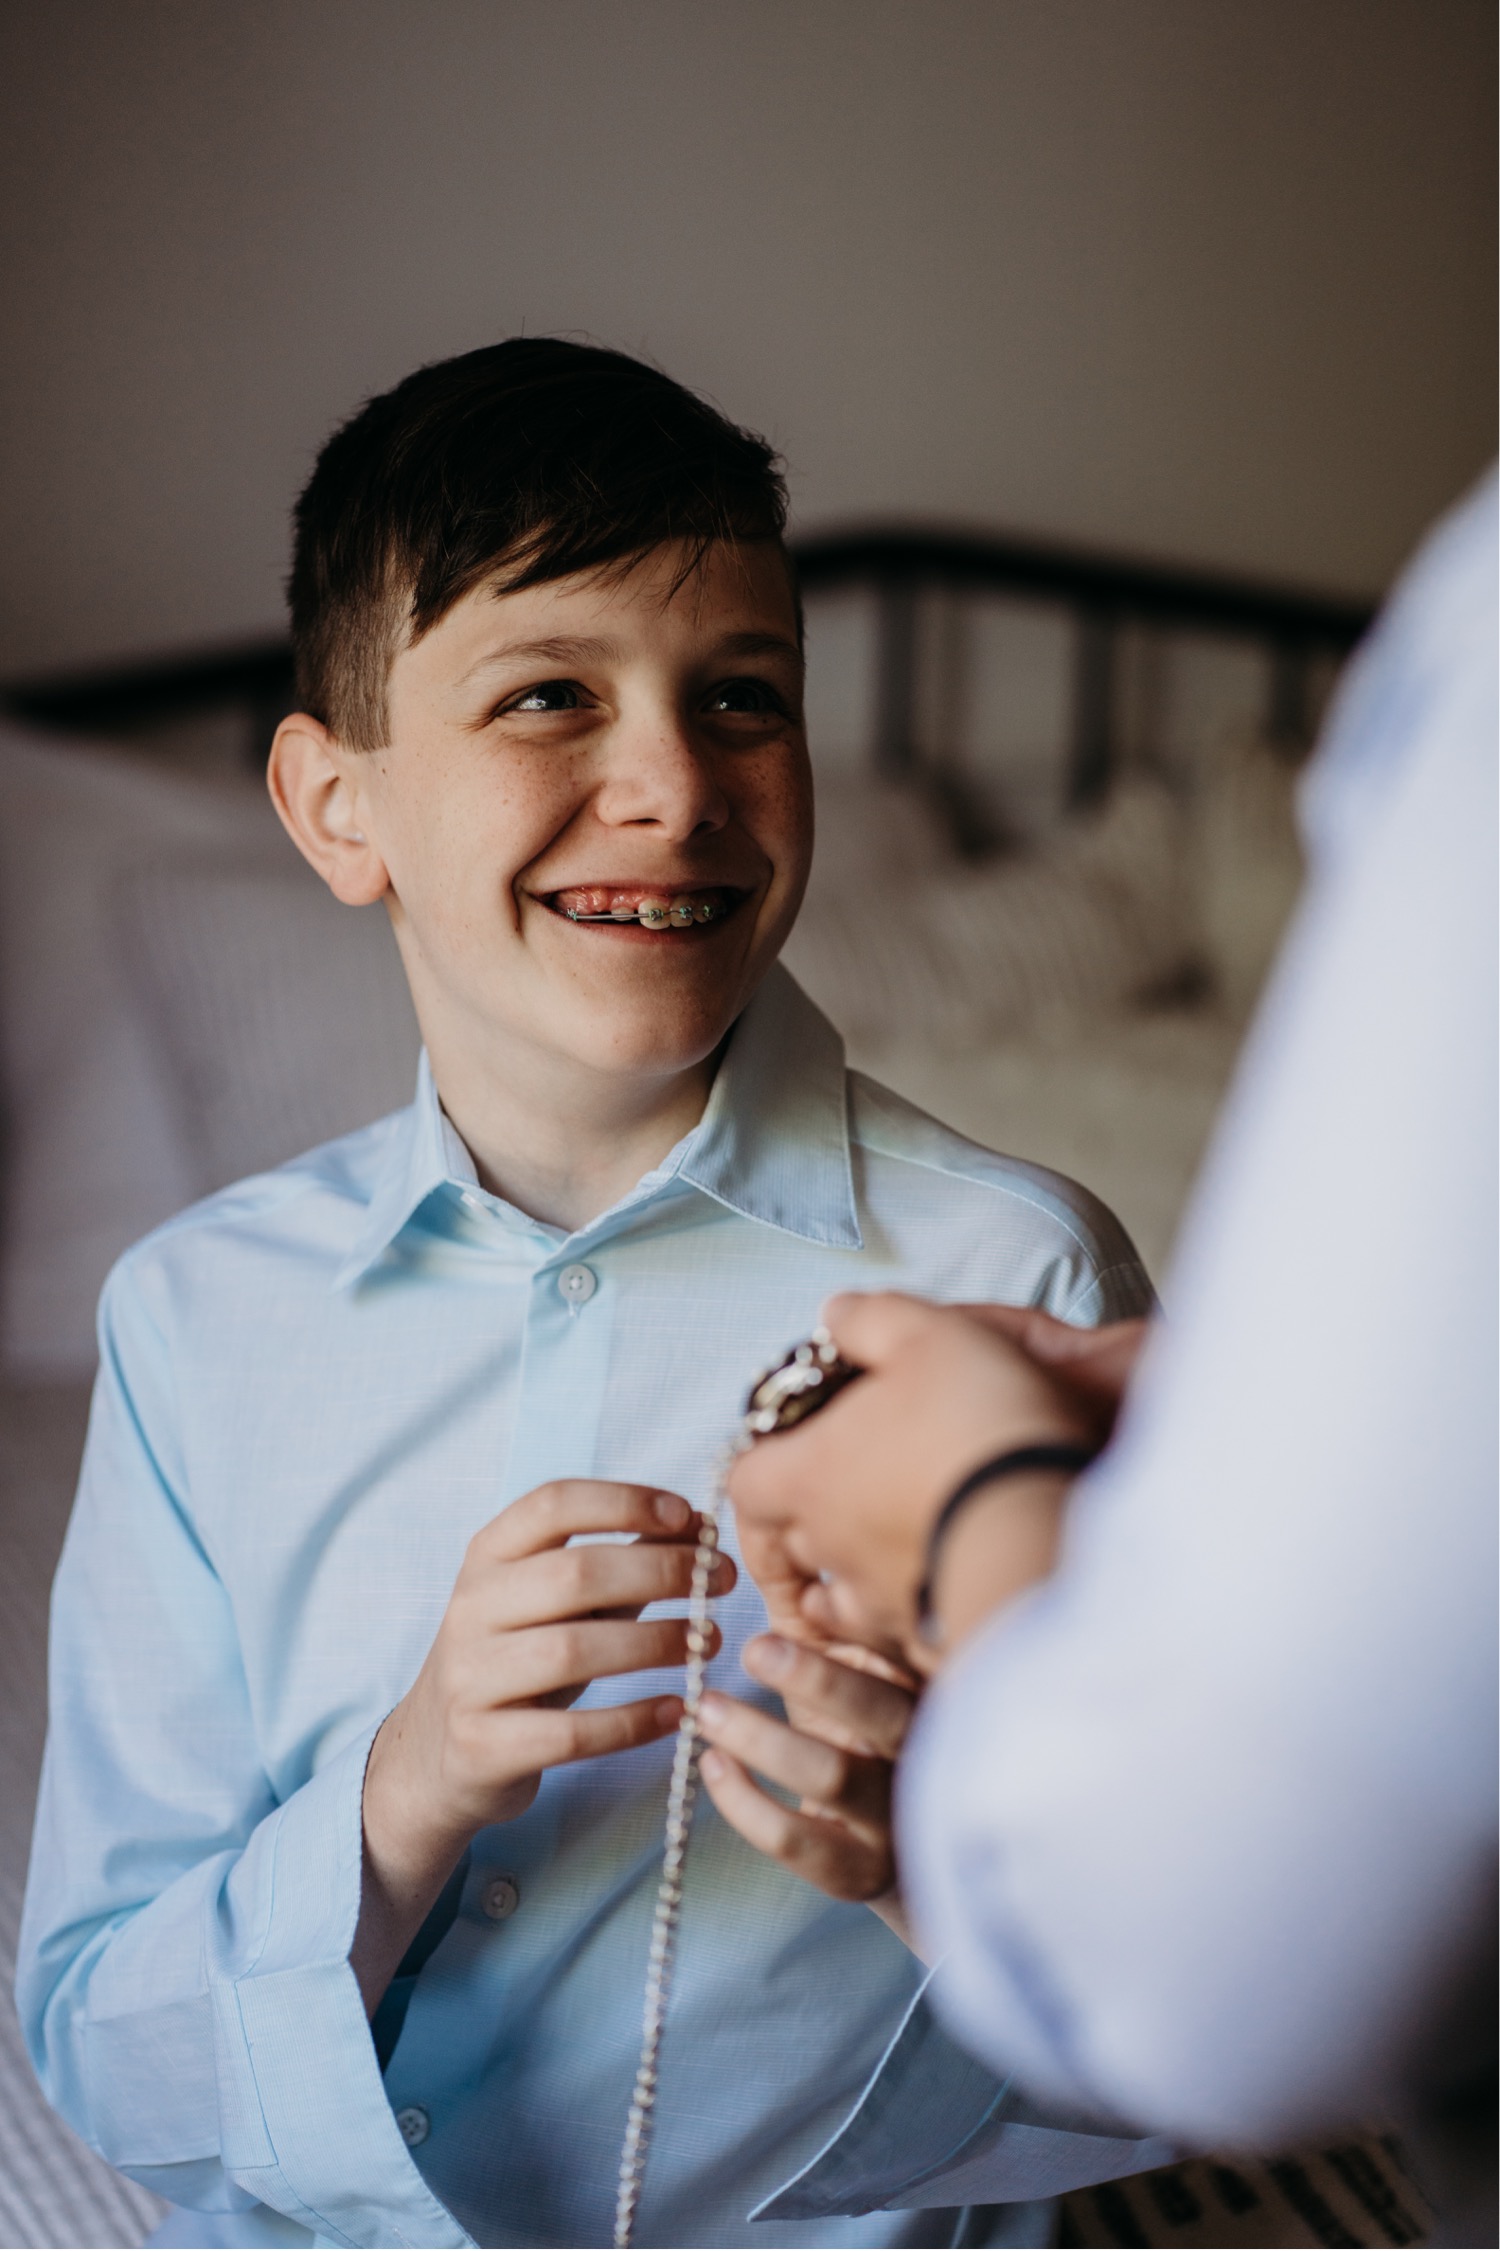 Young boy grins showing his braces as he accepts a gift. Liz Koston Photography.